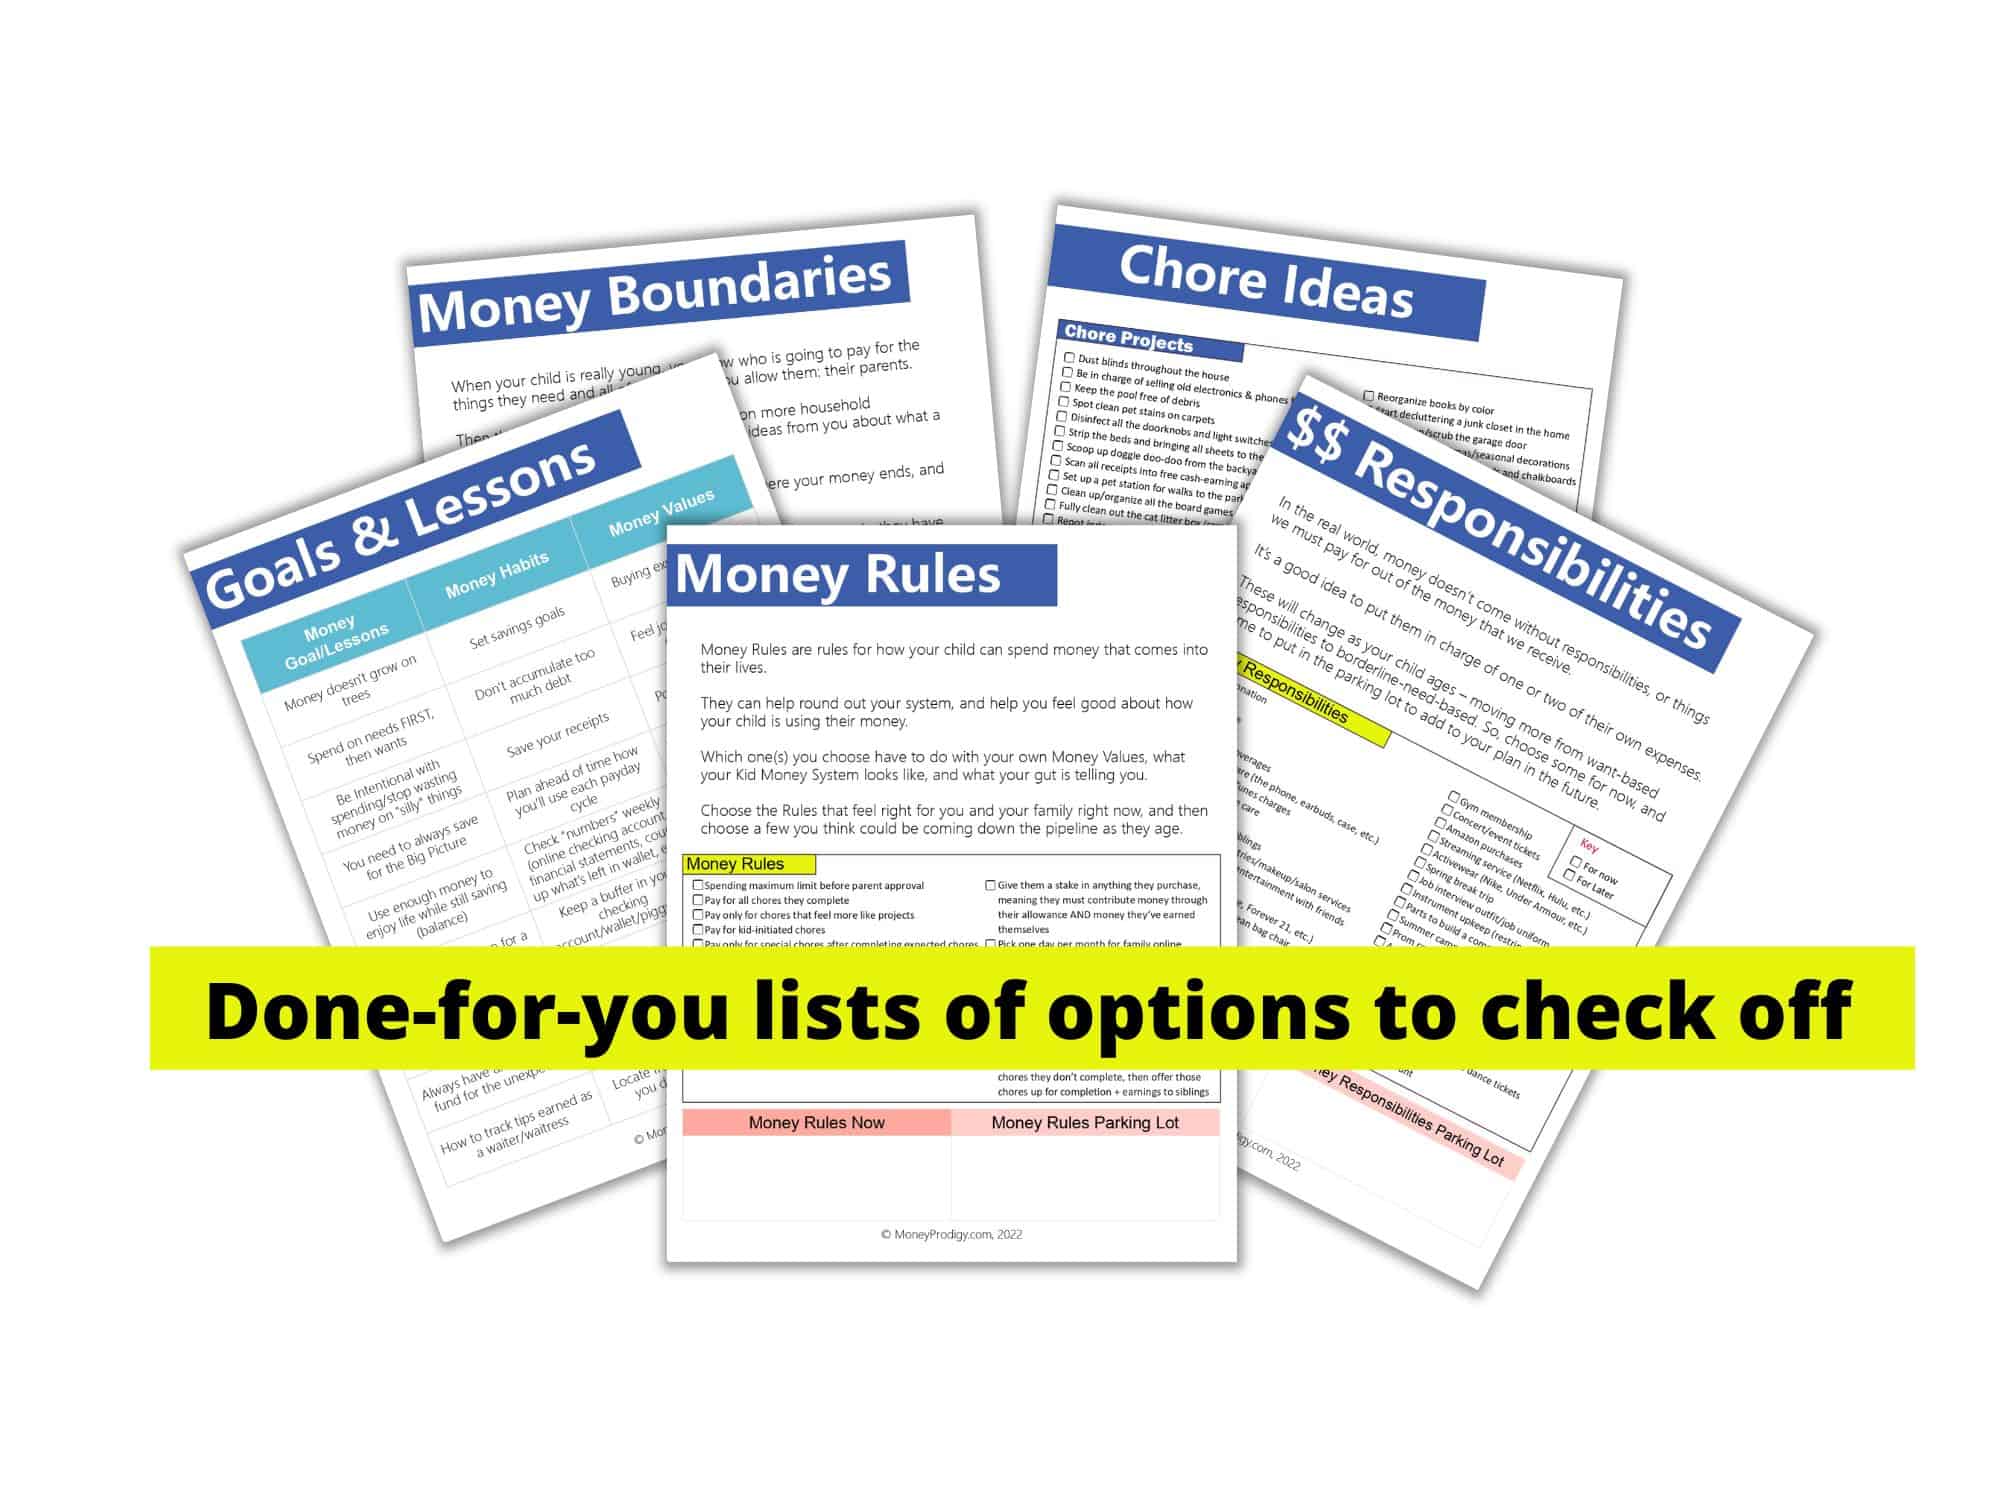 Money boundaries, chore ideas, goals and lessons, and other checklist worksheets